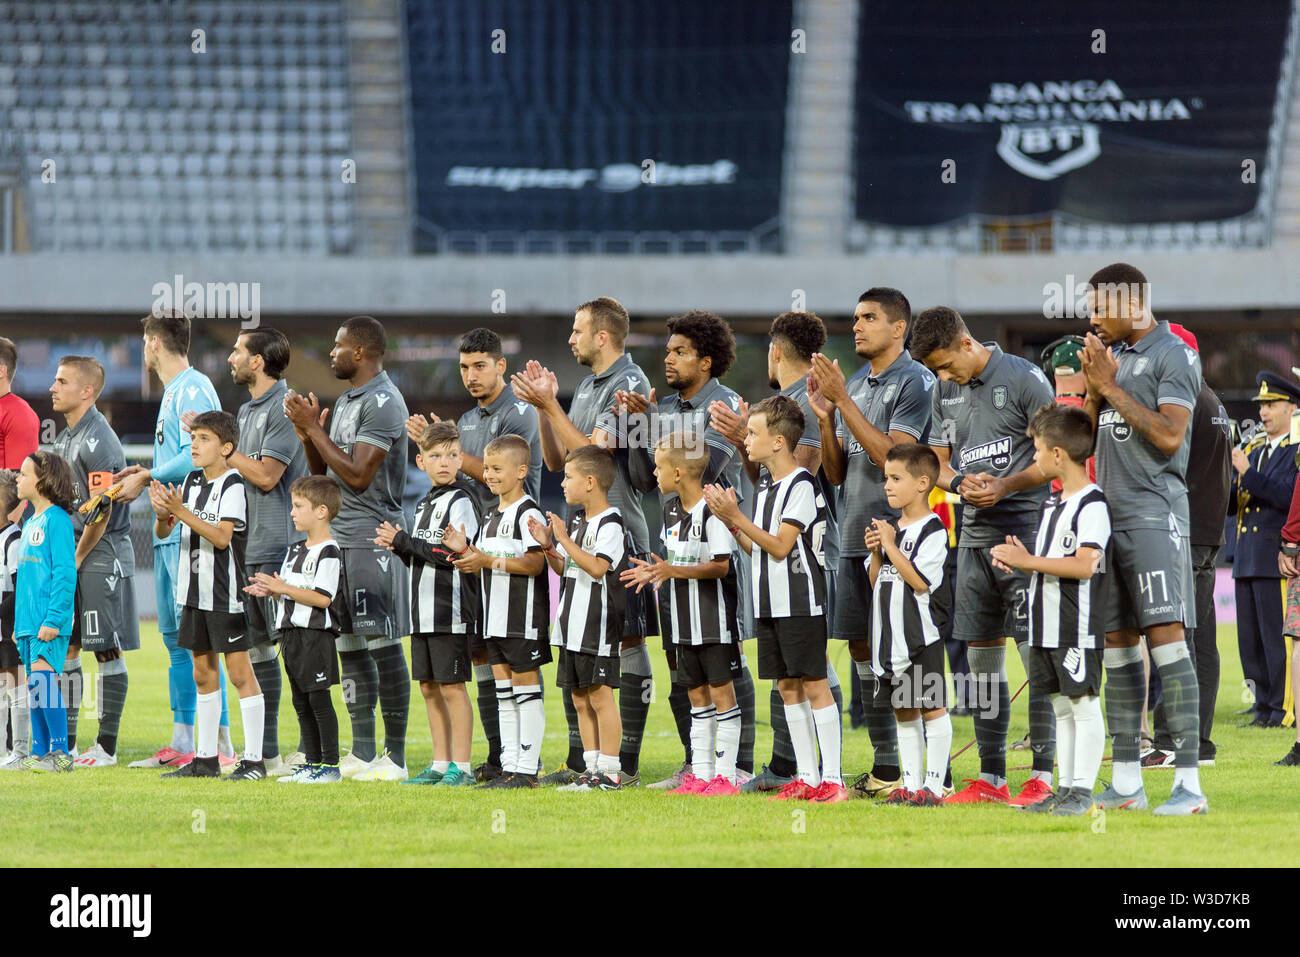 CLUJ NAPOCA, ROMANIA - JULY 12, 2019: Soccer players of PAOK Saloniki entering the field at the beginning of a friendly football match against Univers Stock Photo